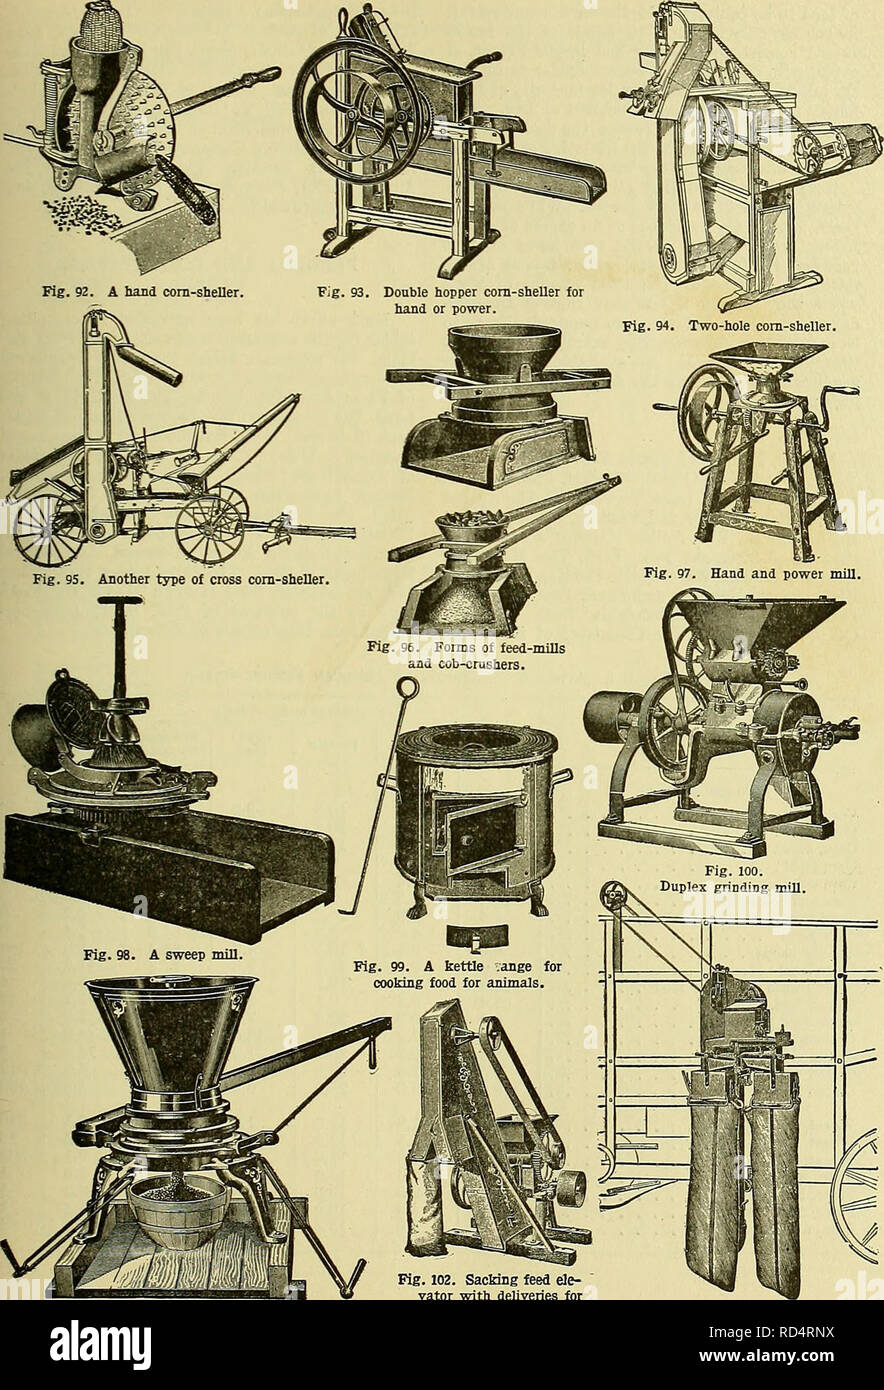 Cyclopedia of farm animals. Domestic animals; Animal products. PRINCIPLES  OF STOCK-FEEDING 91. Fig. 101. Grinding mill. Fig. 102. Sacking feed ele-  vator with deliveries for two sacks. Fig. 103. Grain bagger